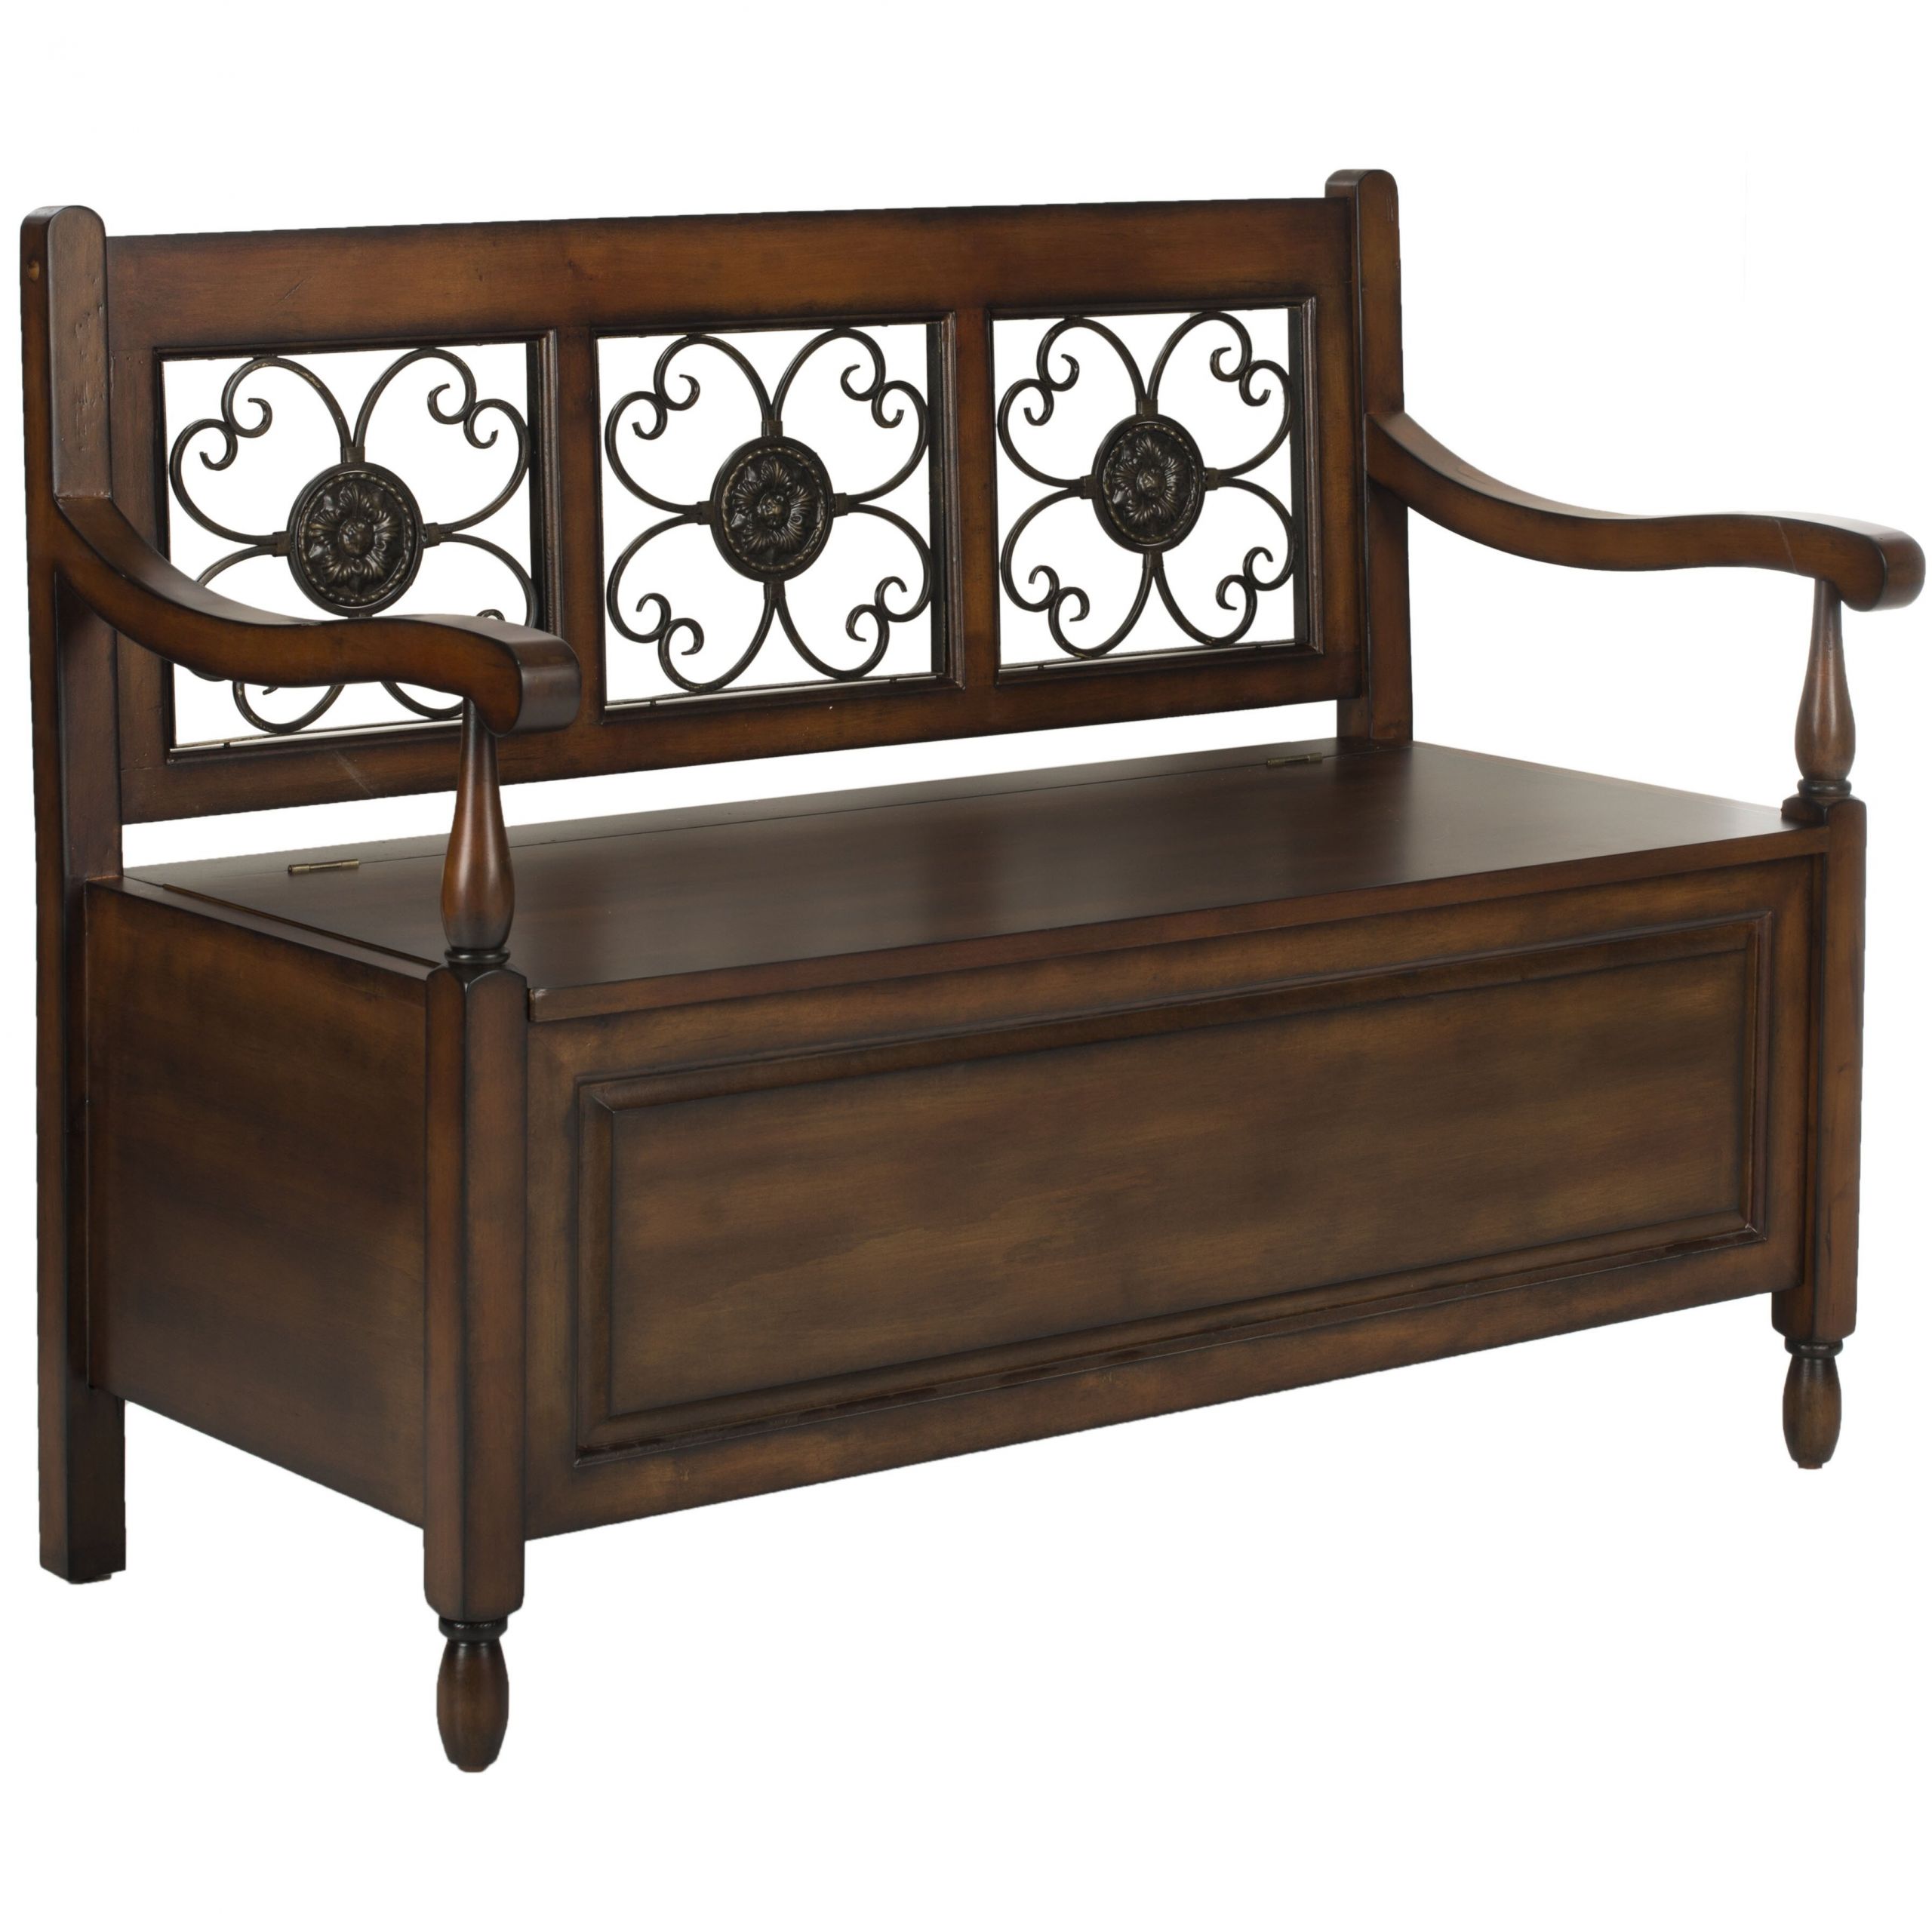 Bench For Entryway With Storage
 Safavieh Erica Wood Storage Entryway Bench & Reviews